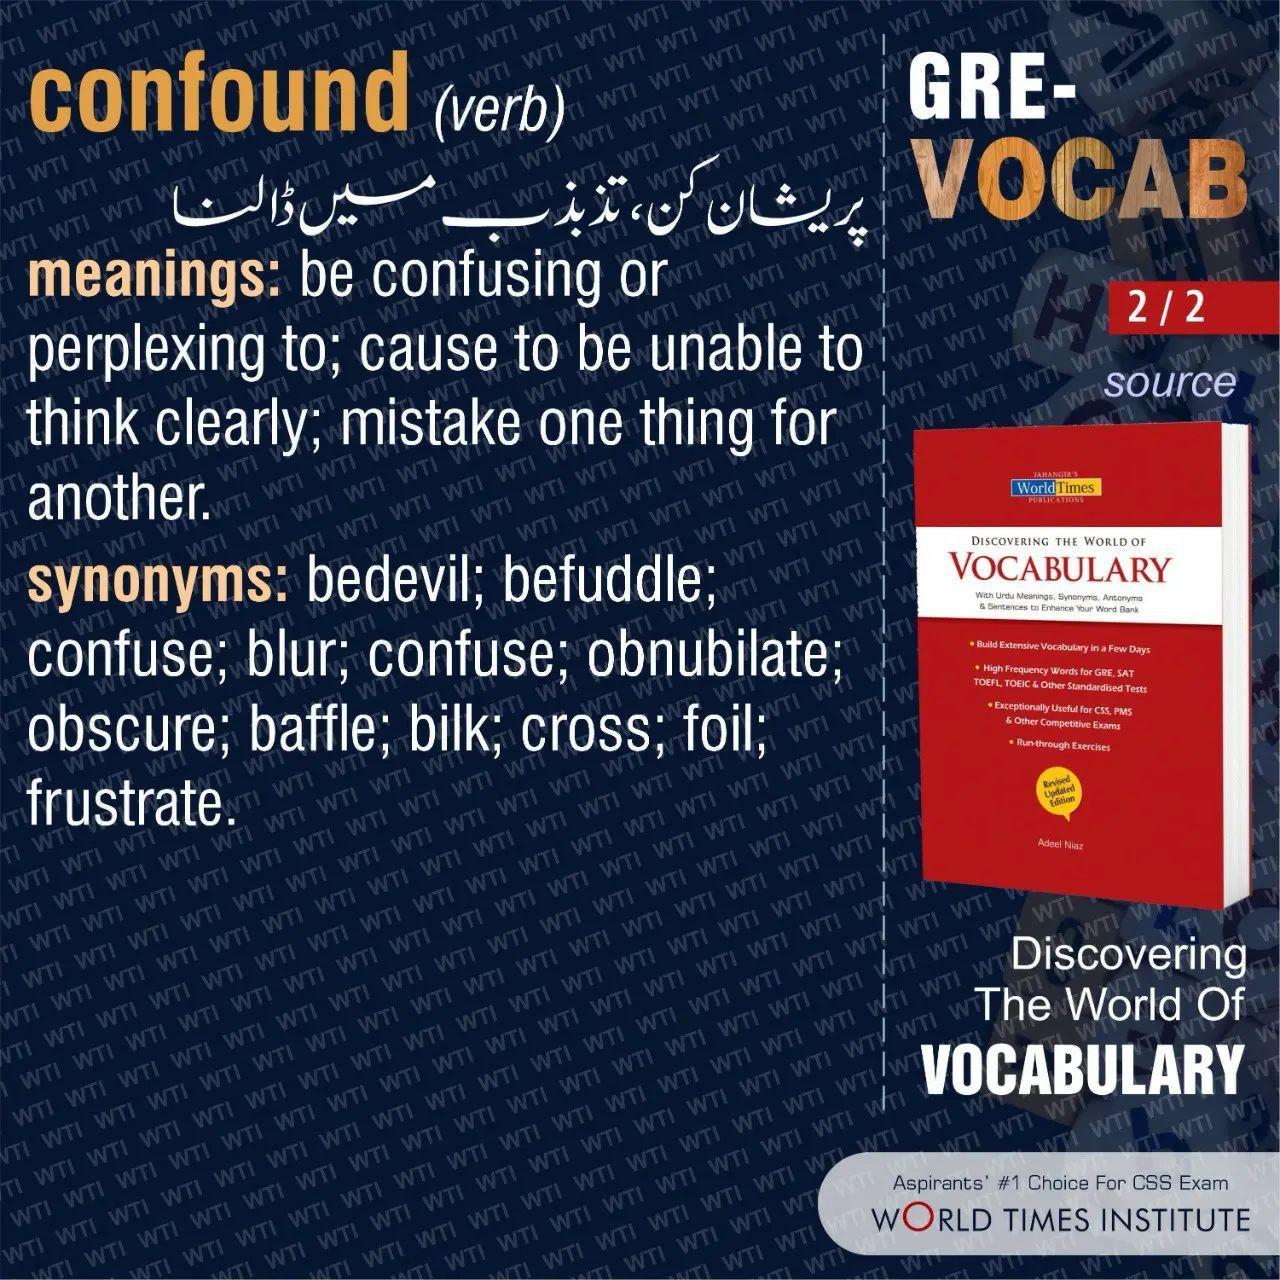 You are currently viewing Discovering The World of Vocabulary 25-09-2022